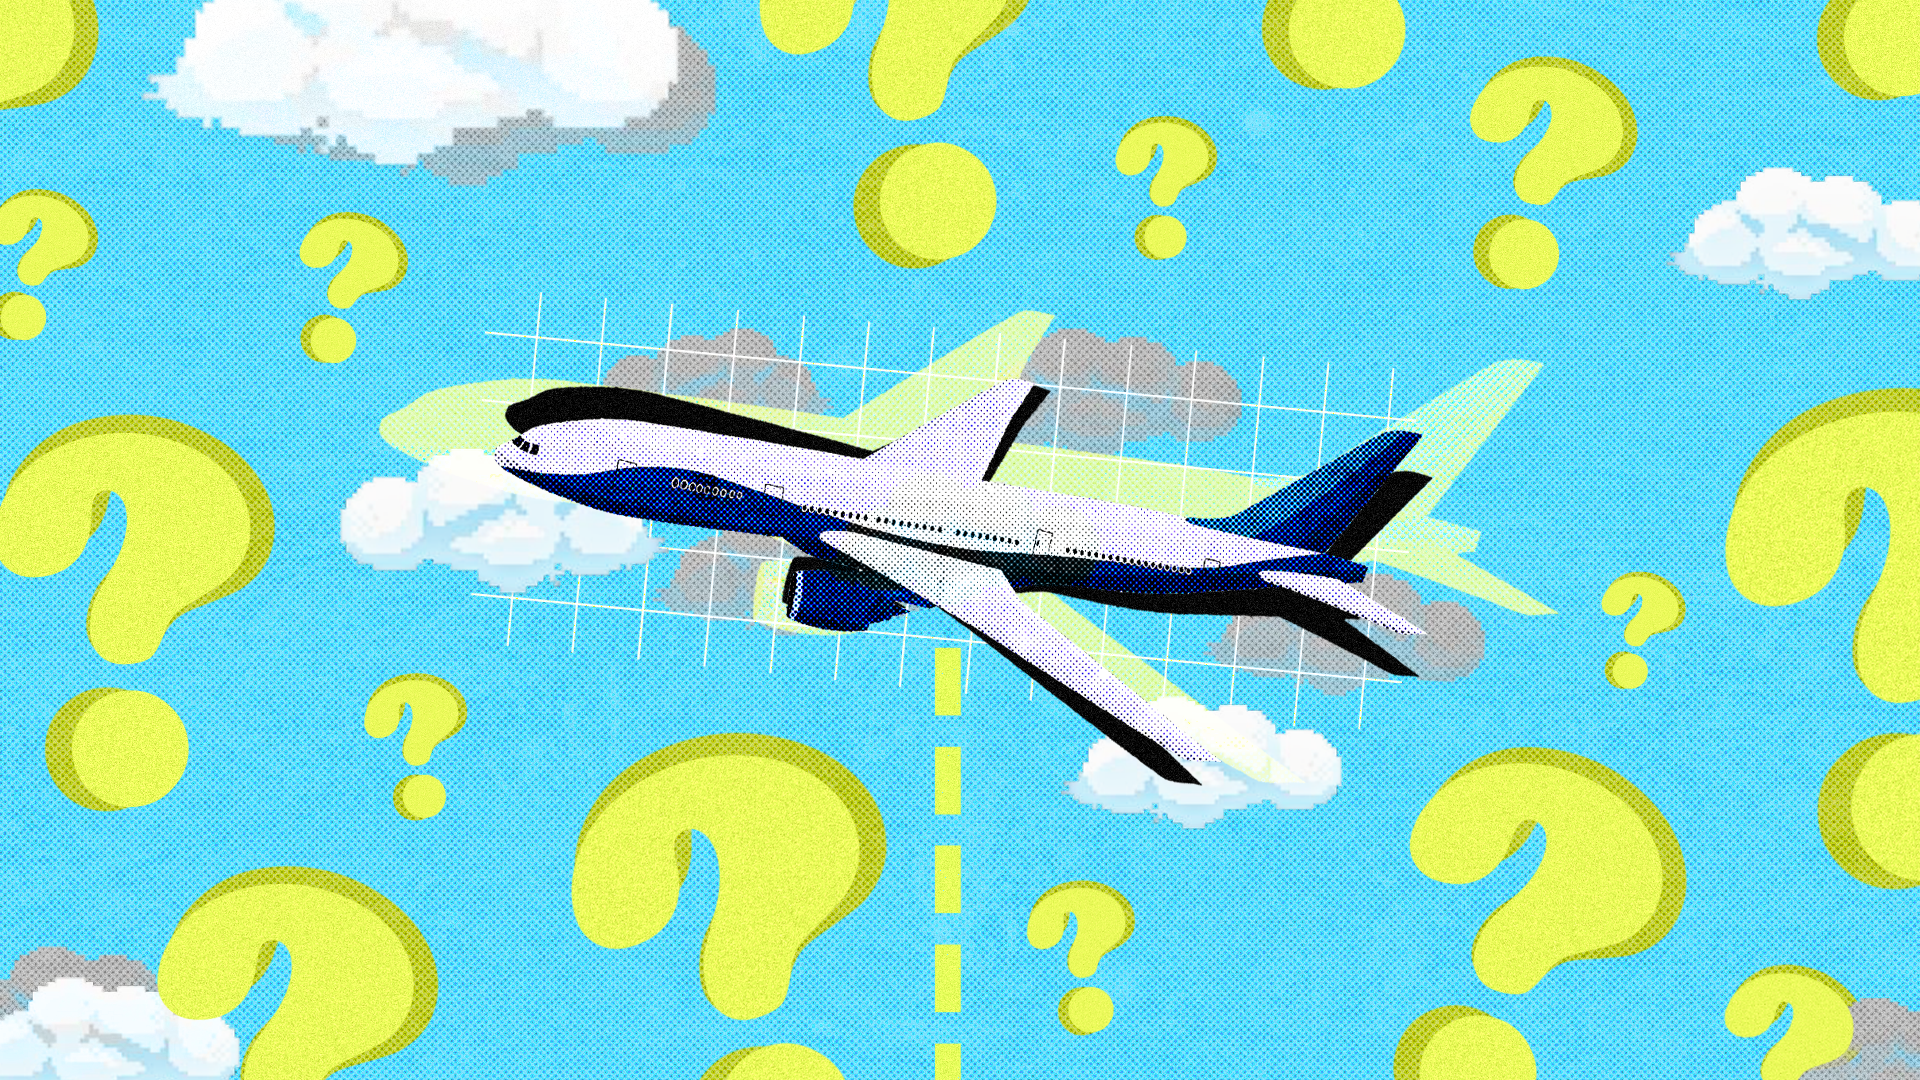 What should the aviation industry do to appeal to Gen Z?